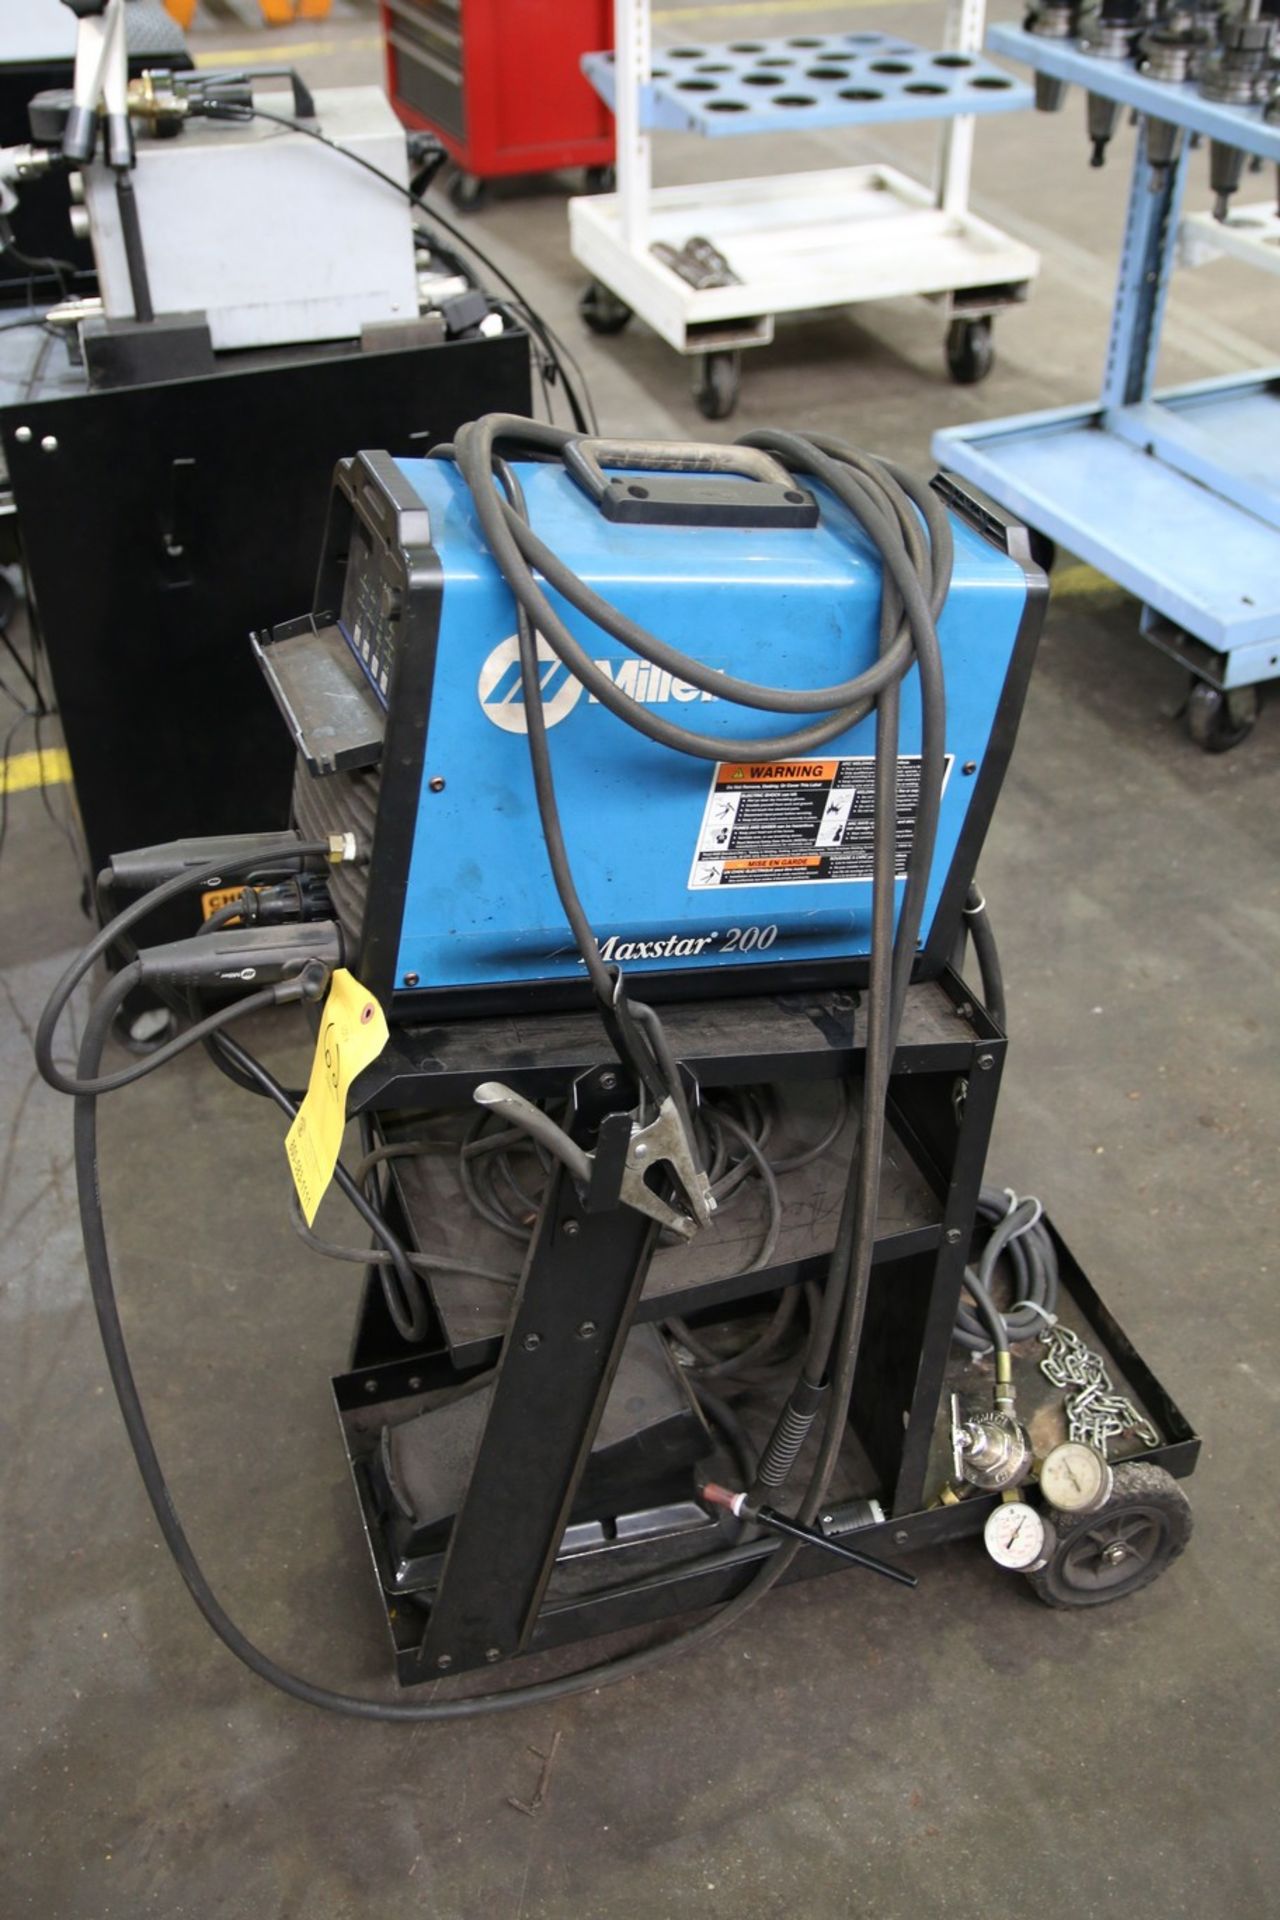 Miller Maxstar 200 Miller Maxstar 200 Welder with Cart and Accessories - Image 2 of 4